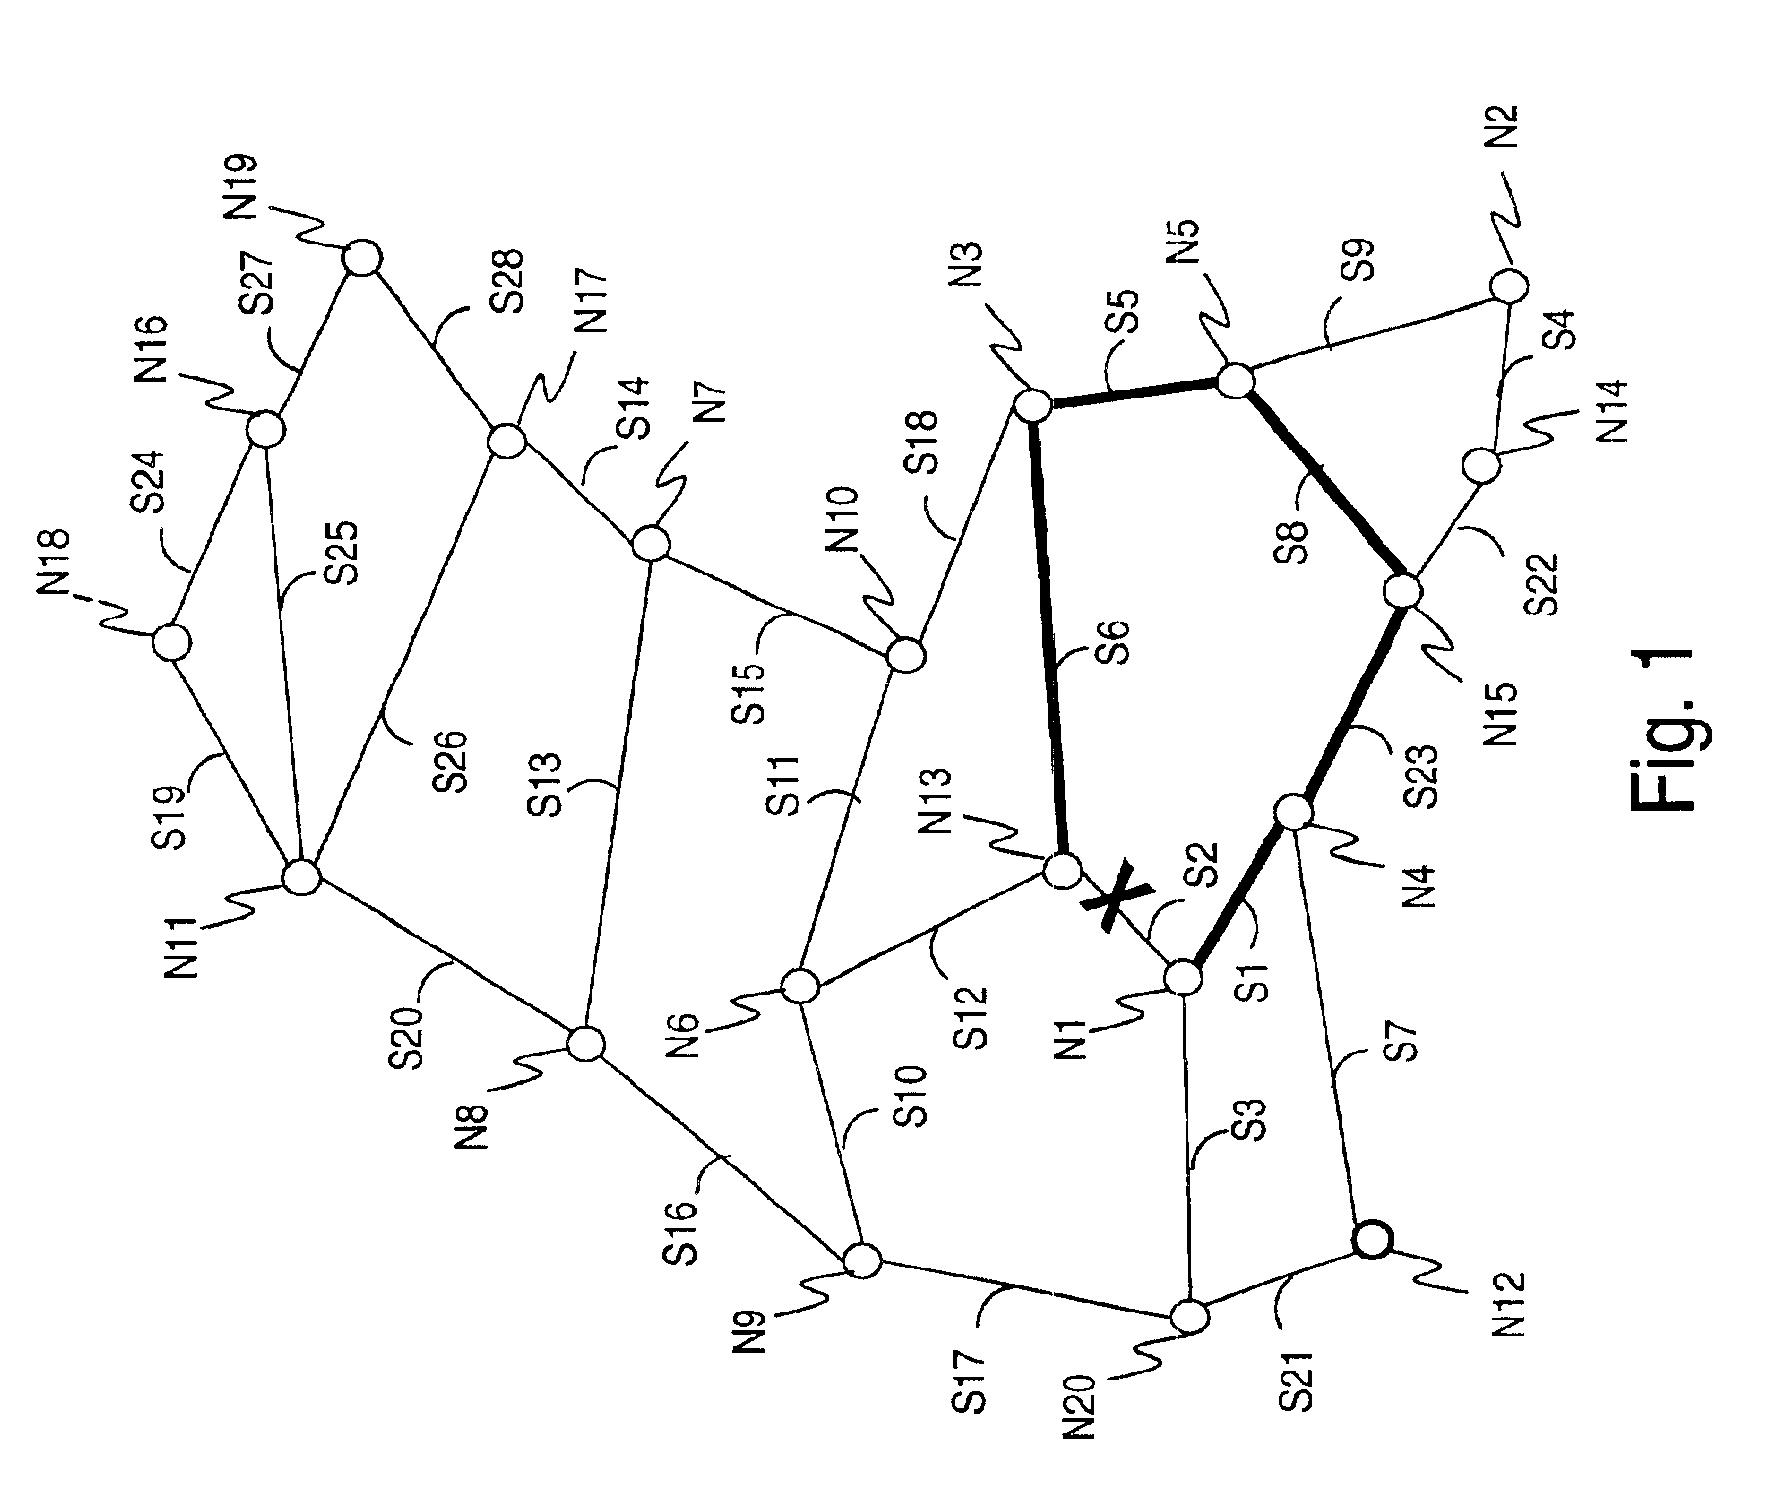 Method of providing restoration routes in a mesh network